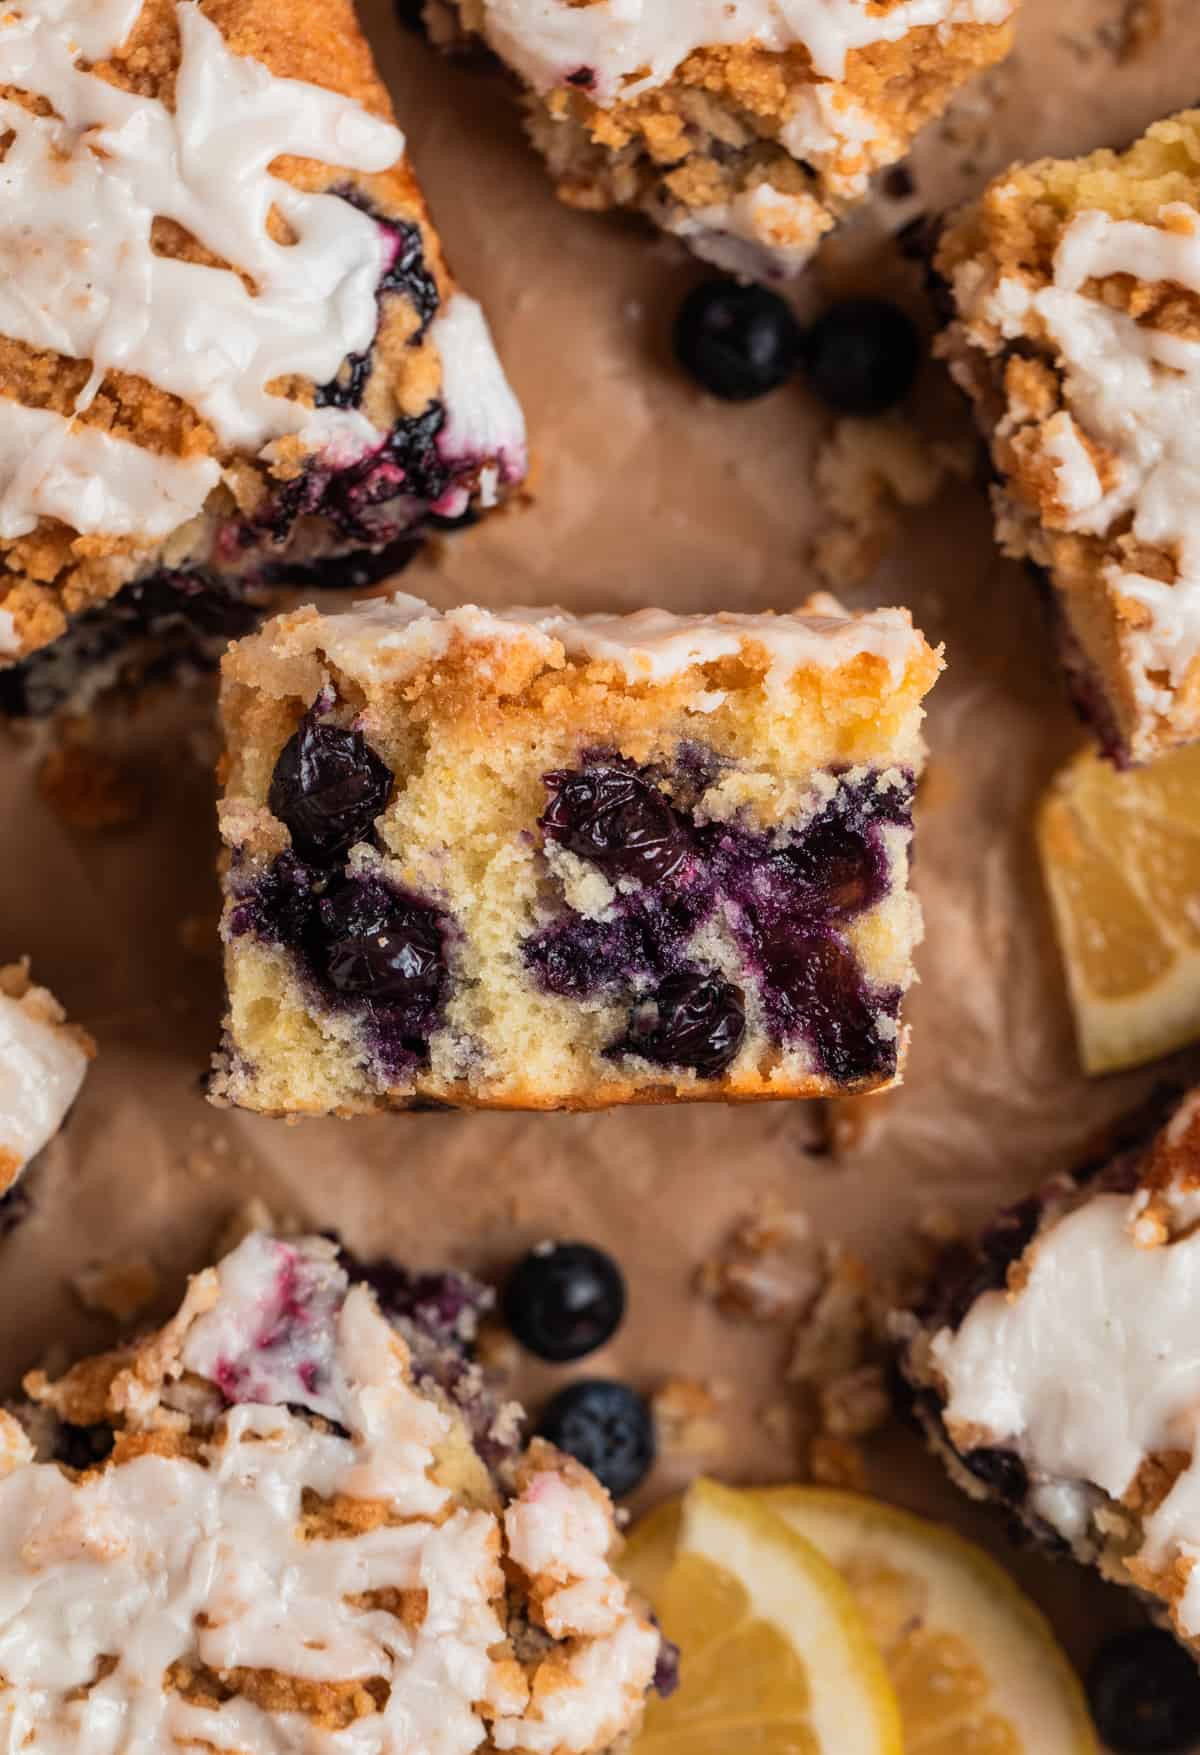 Slice of blueberry lemon coffee cake propped on its side to show texture of cake layer.